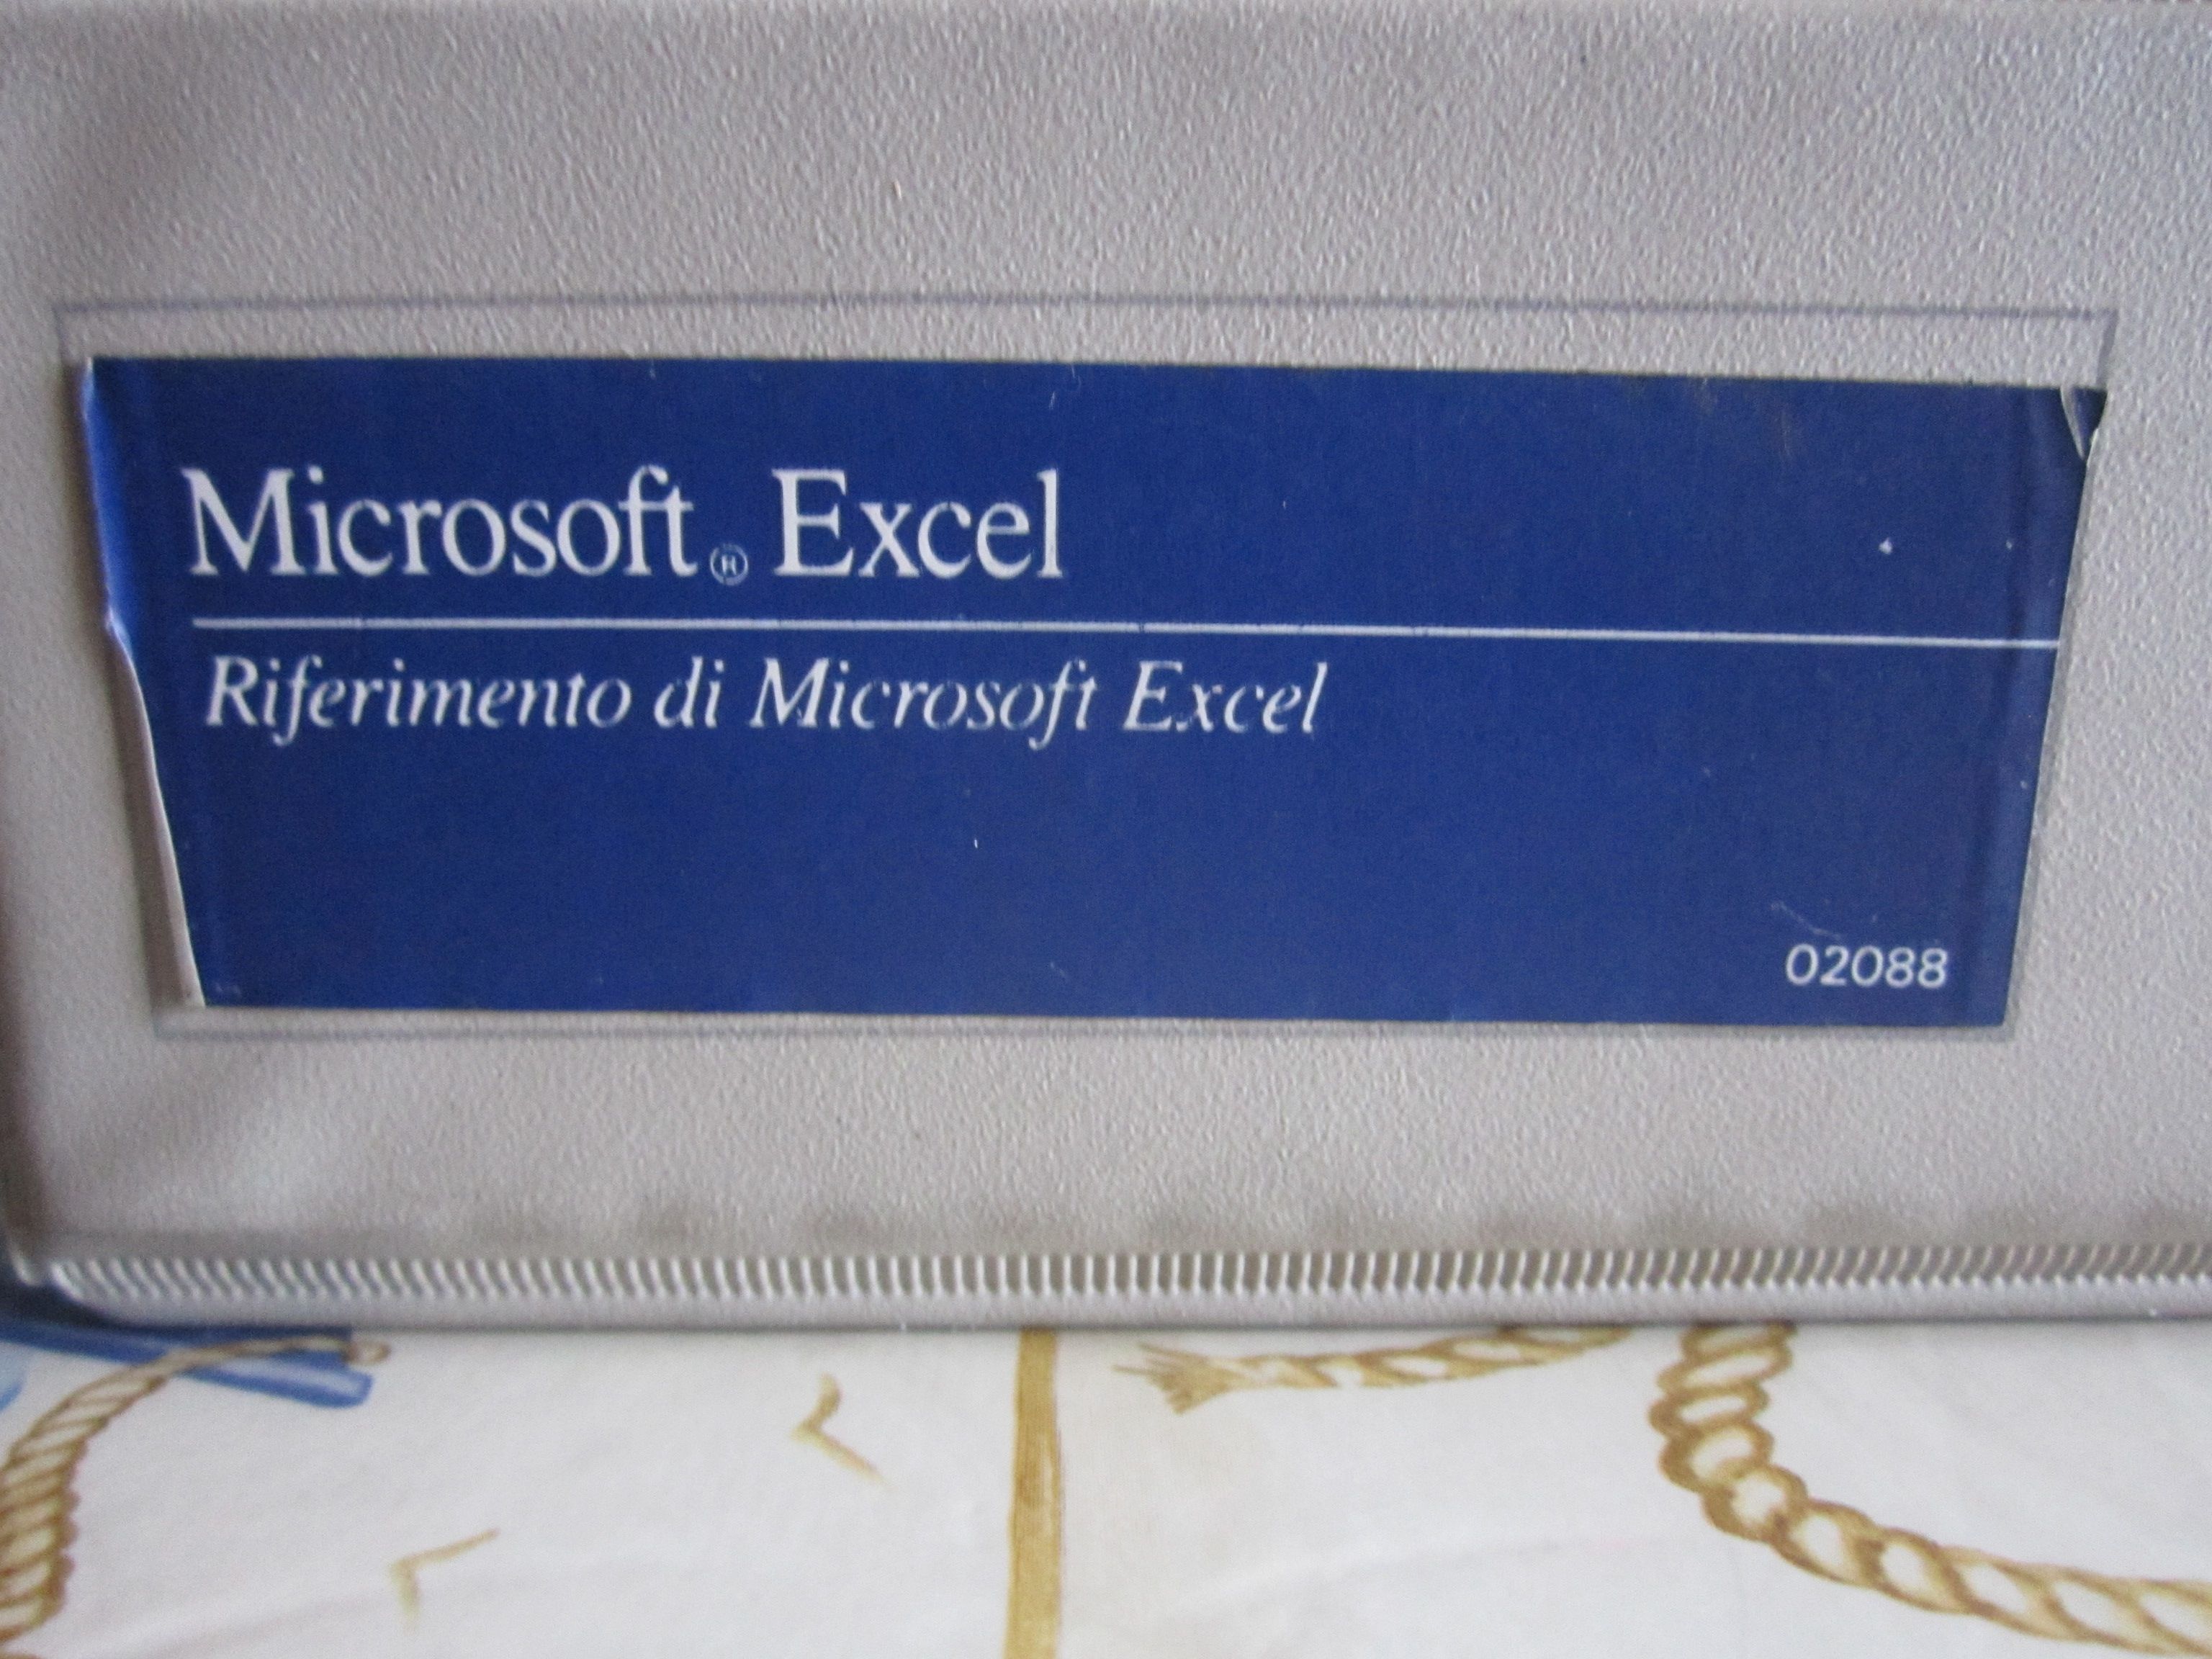 http://museodelcomputer.org/parts/microsoft/excel210/IMG_6420.JPG